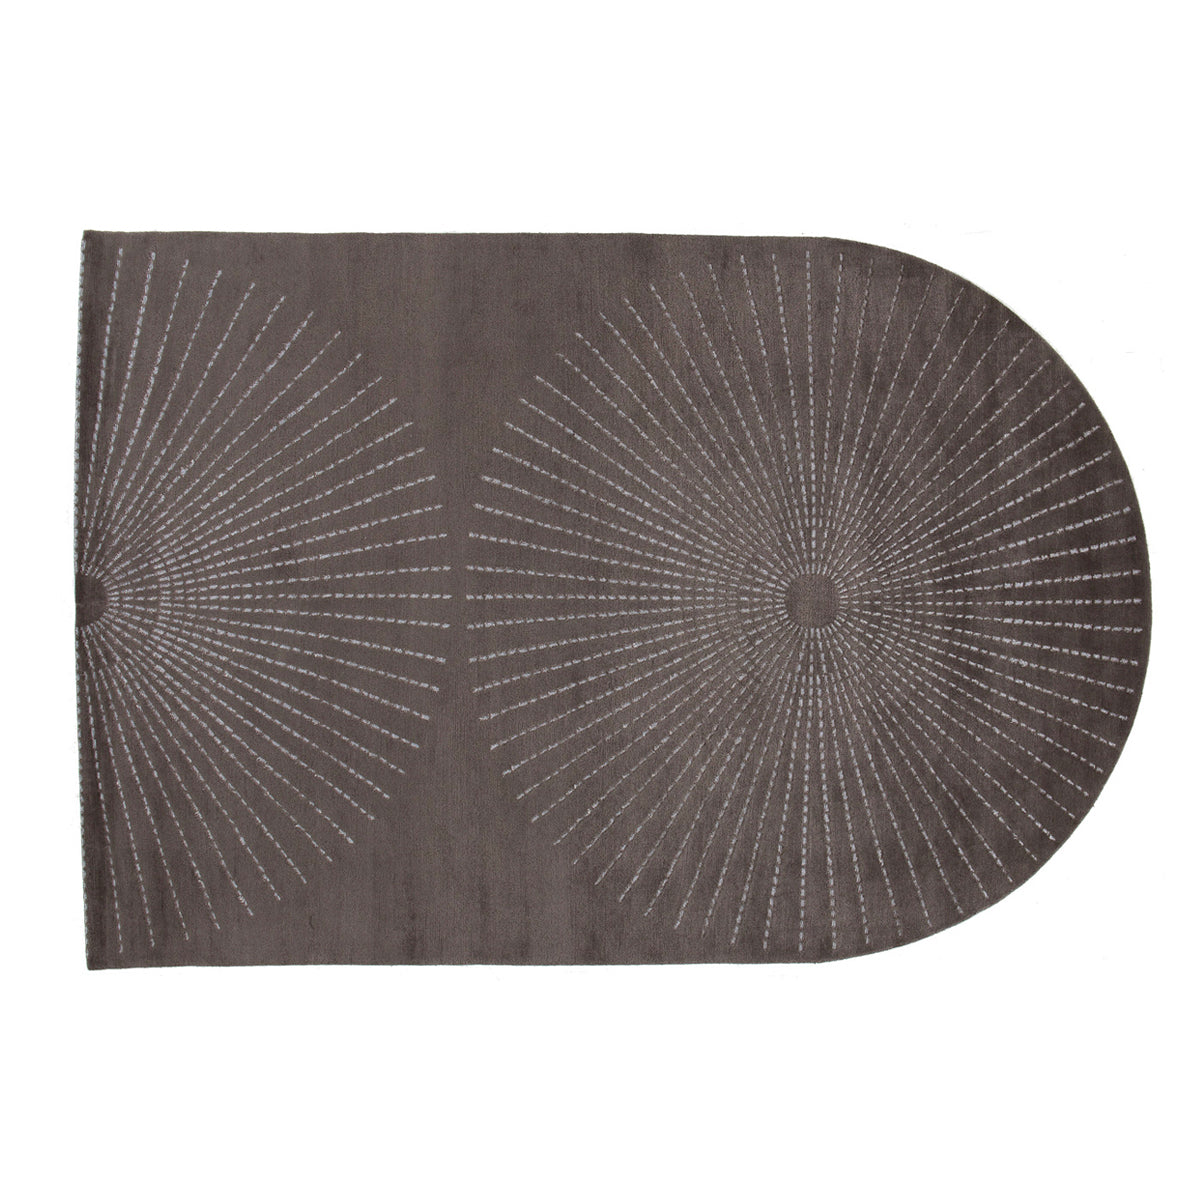 Irradia Rug - Round Side by Golran | Do Shop